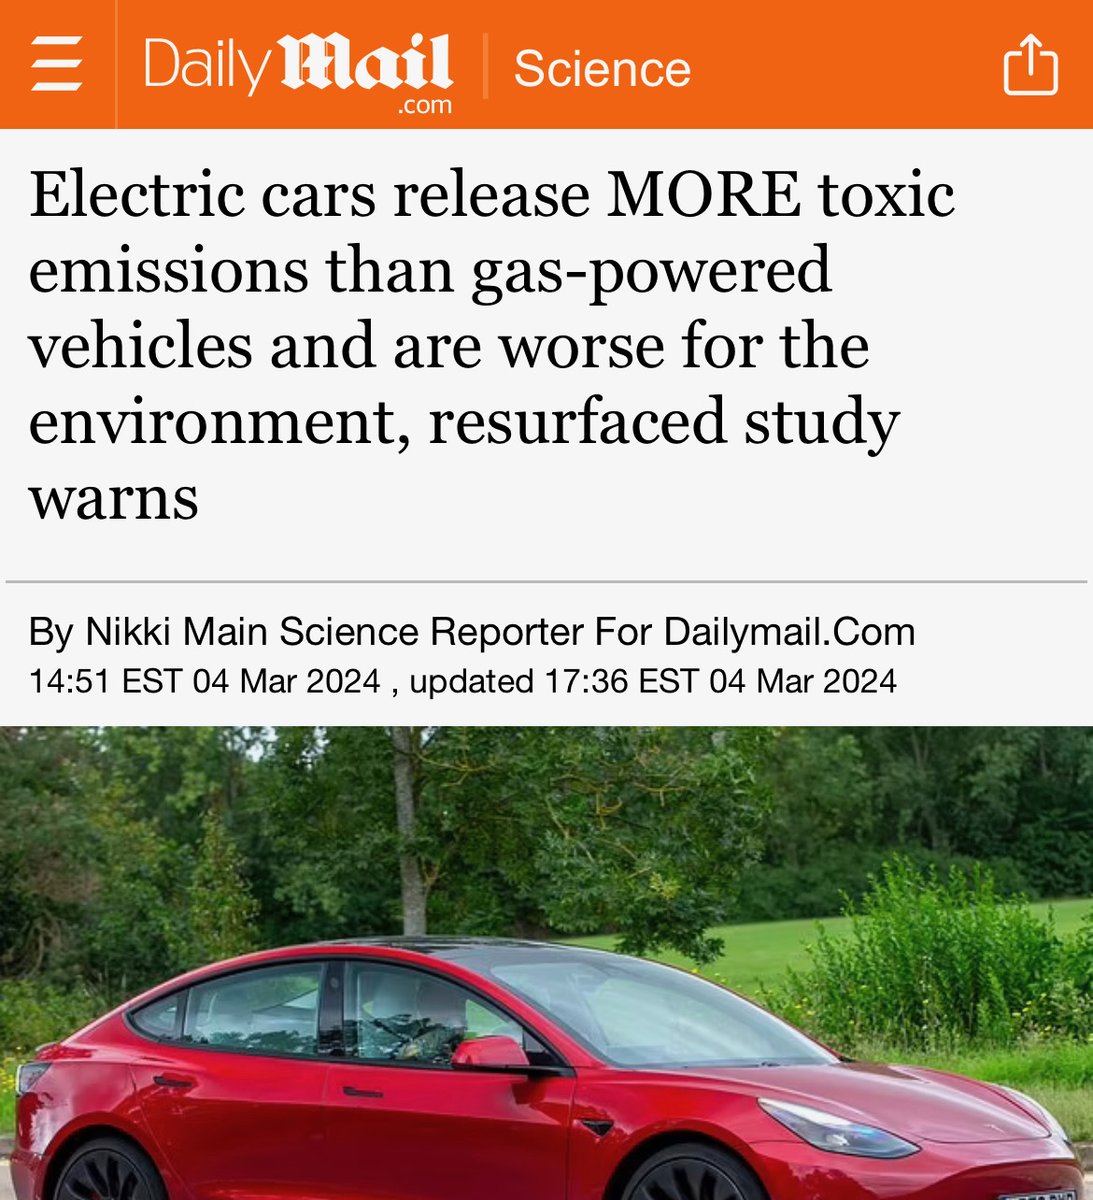 Electric cars release more toxic emissions than gas-powered vehicles. EV tire tread releases toxic particles 400 times GREATER than exhaust emissions. The only thing that's green about electric vehicles is the cost.